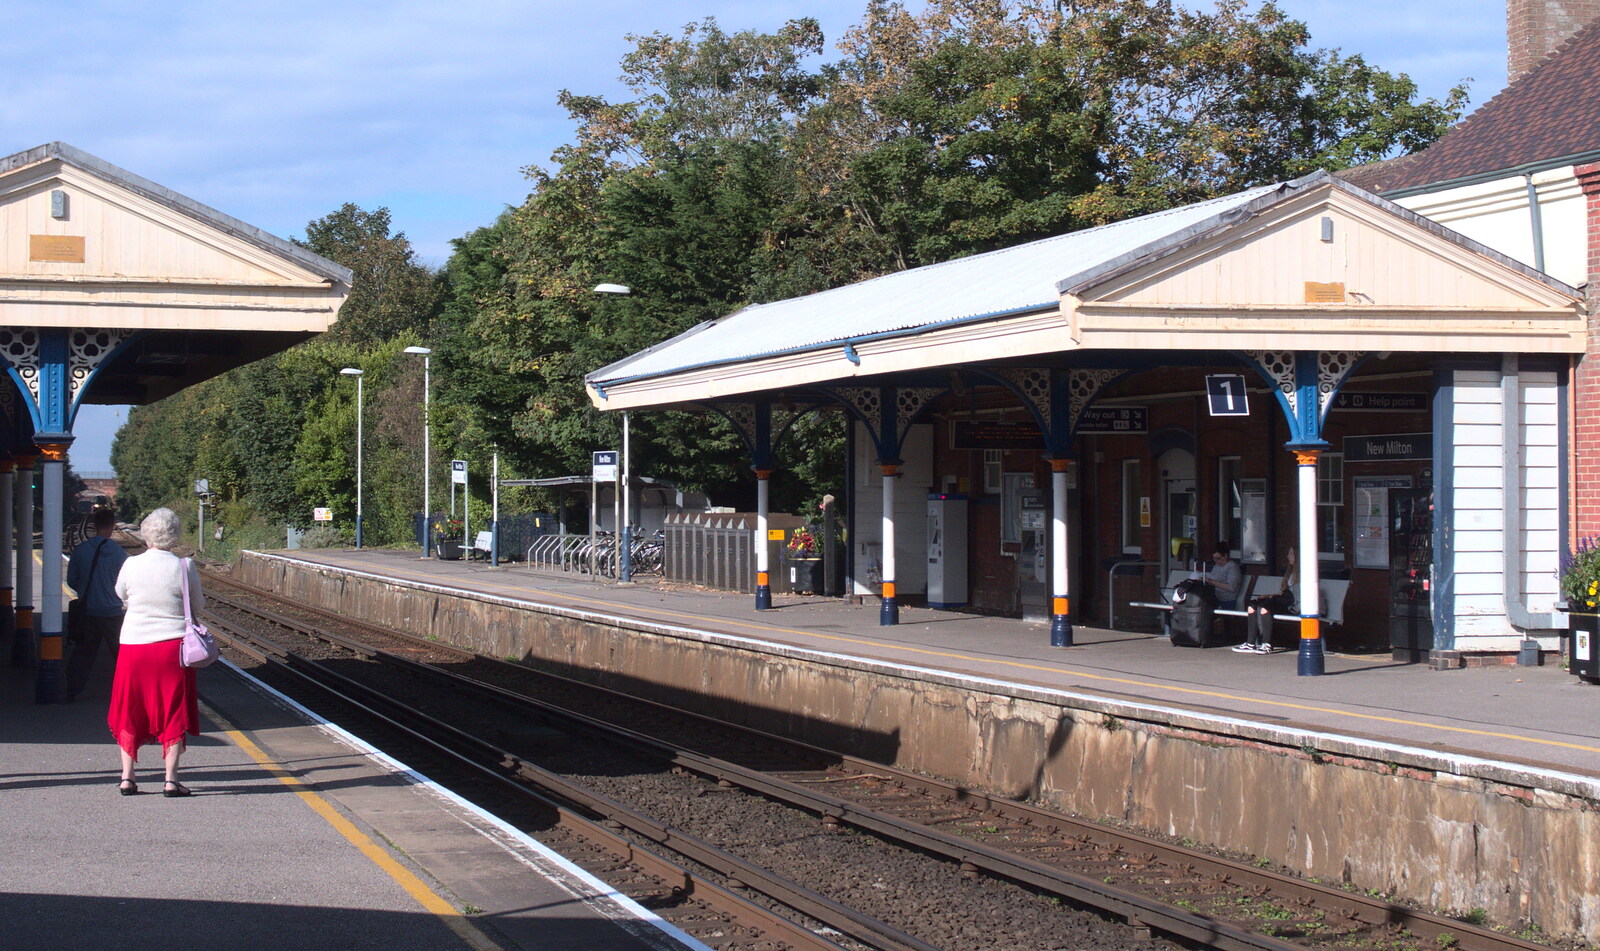 The platform shelters at New Milton from Grandmother's Wake, Winkton, Christchurch, Dorset - 18th September 2017